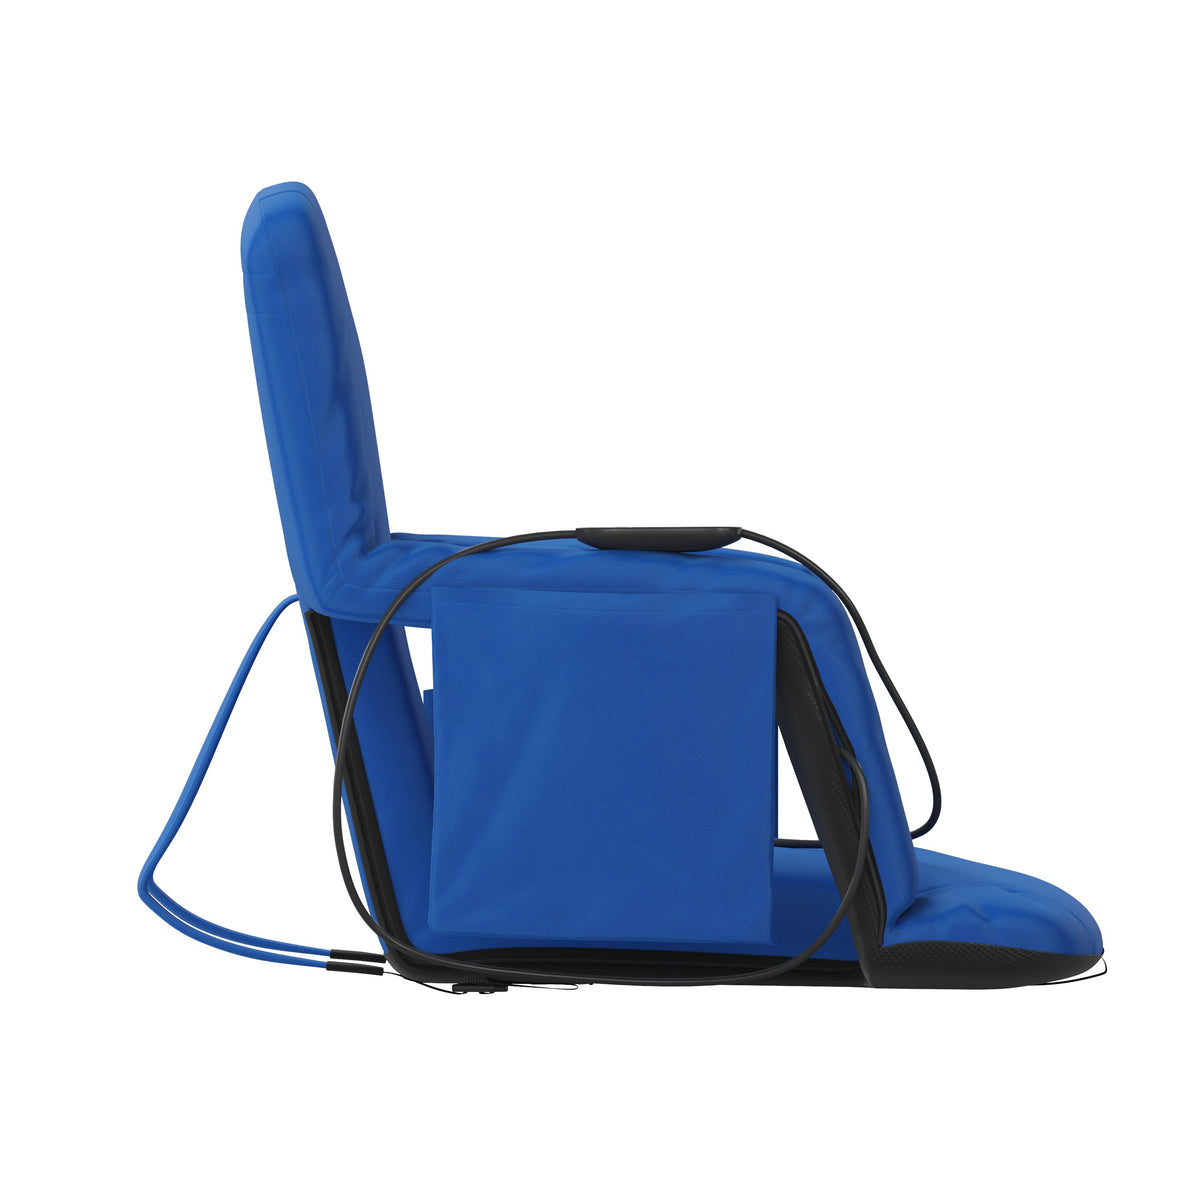 Blue |#| Foldable Reclining Stadium Chair with Backpack Straps-Heated Back and Seat-Blue